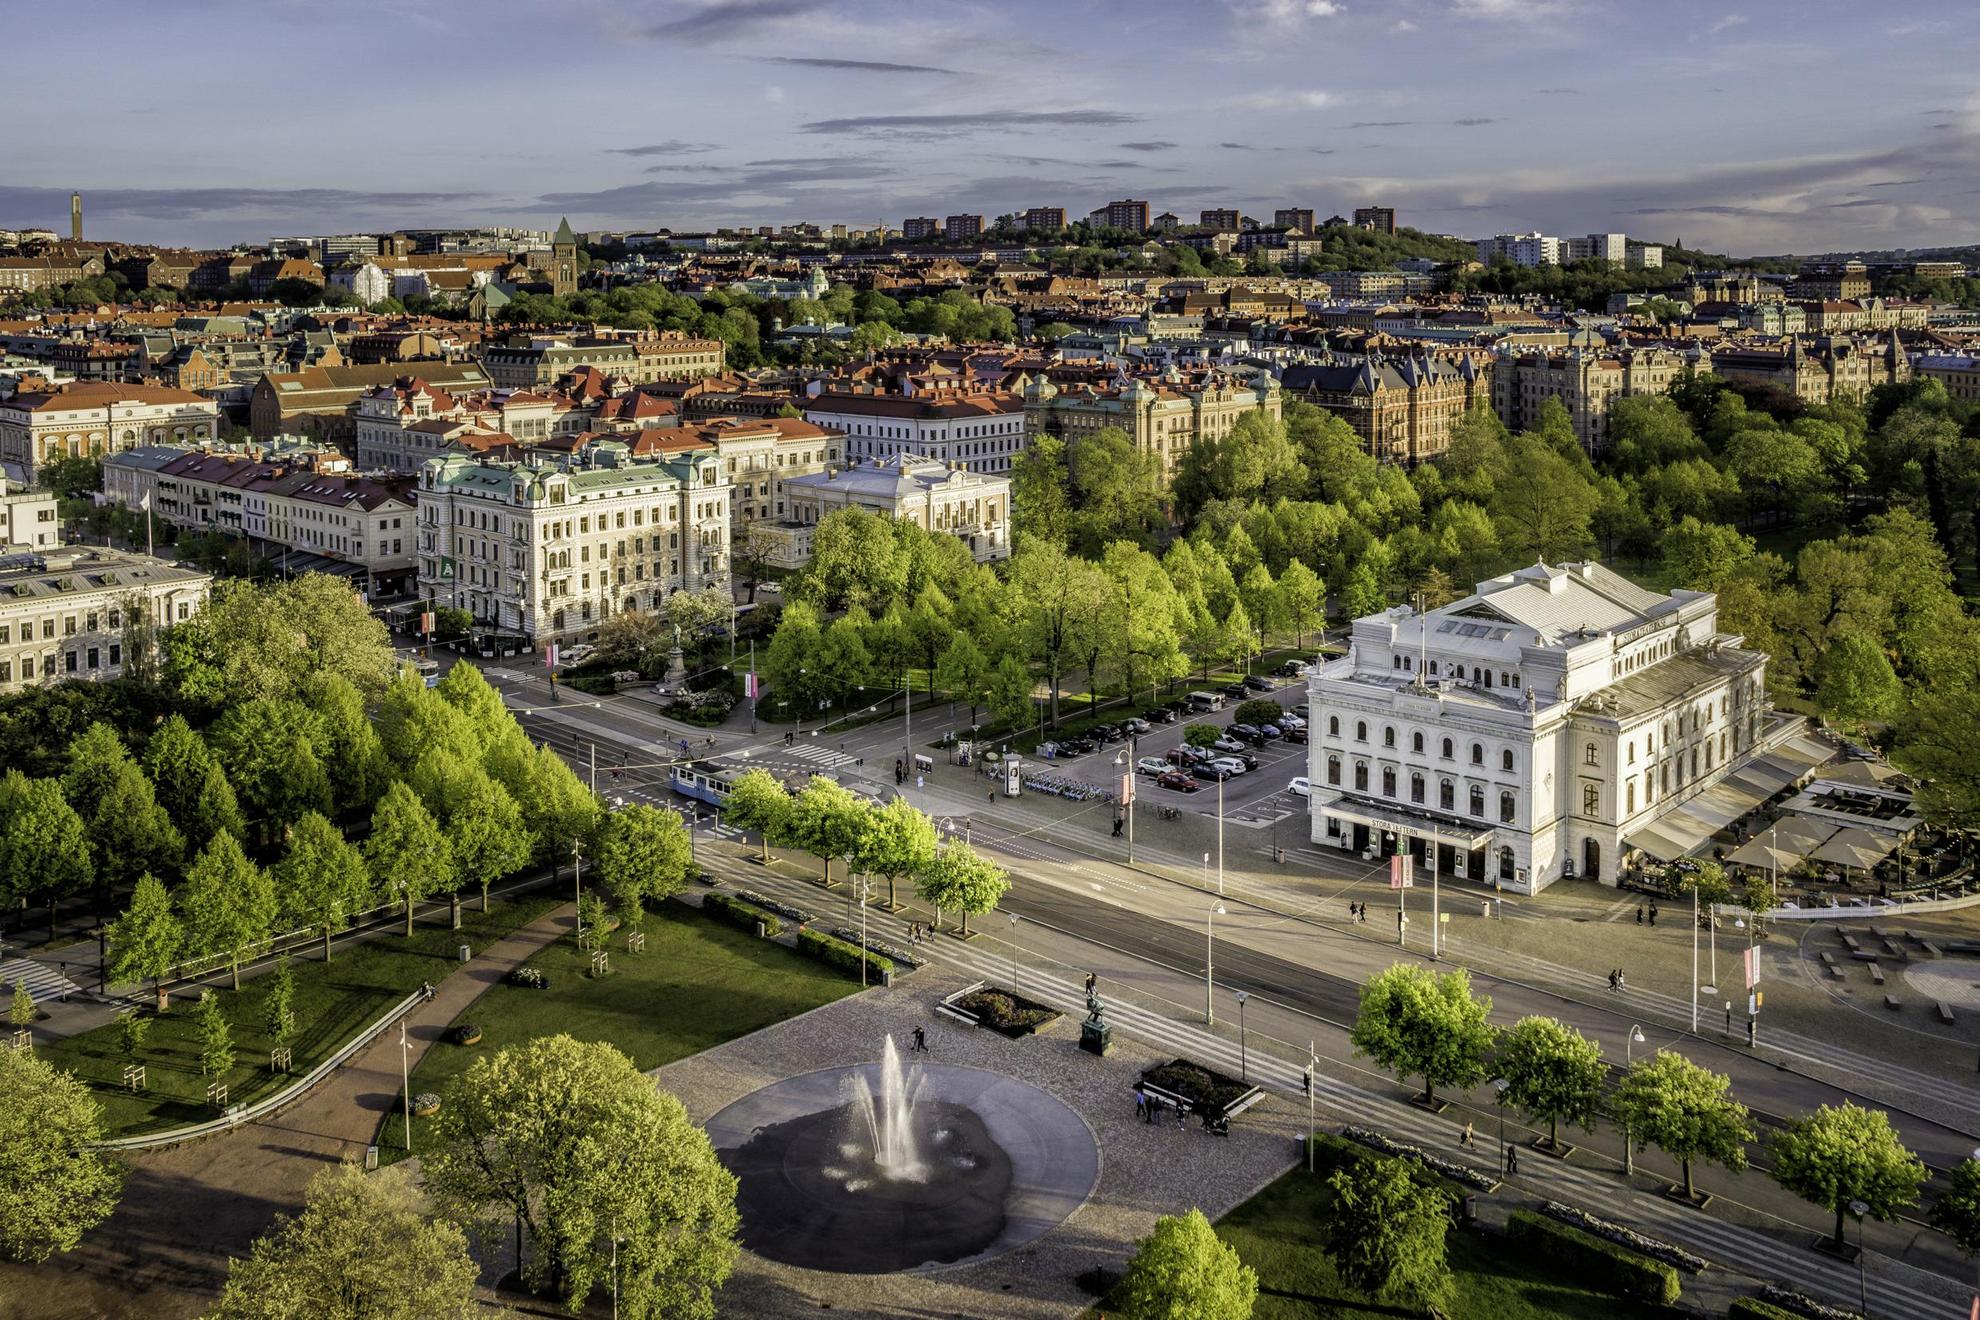 The Gothenburg skyline with streets, large buildings and a park with a fountain.